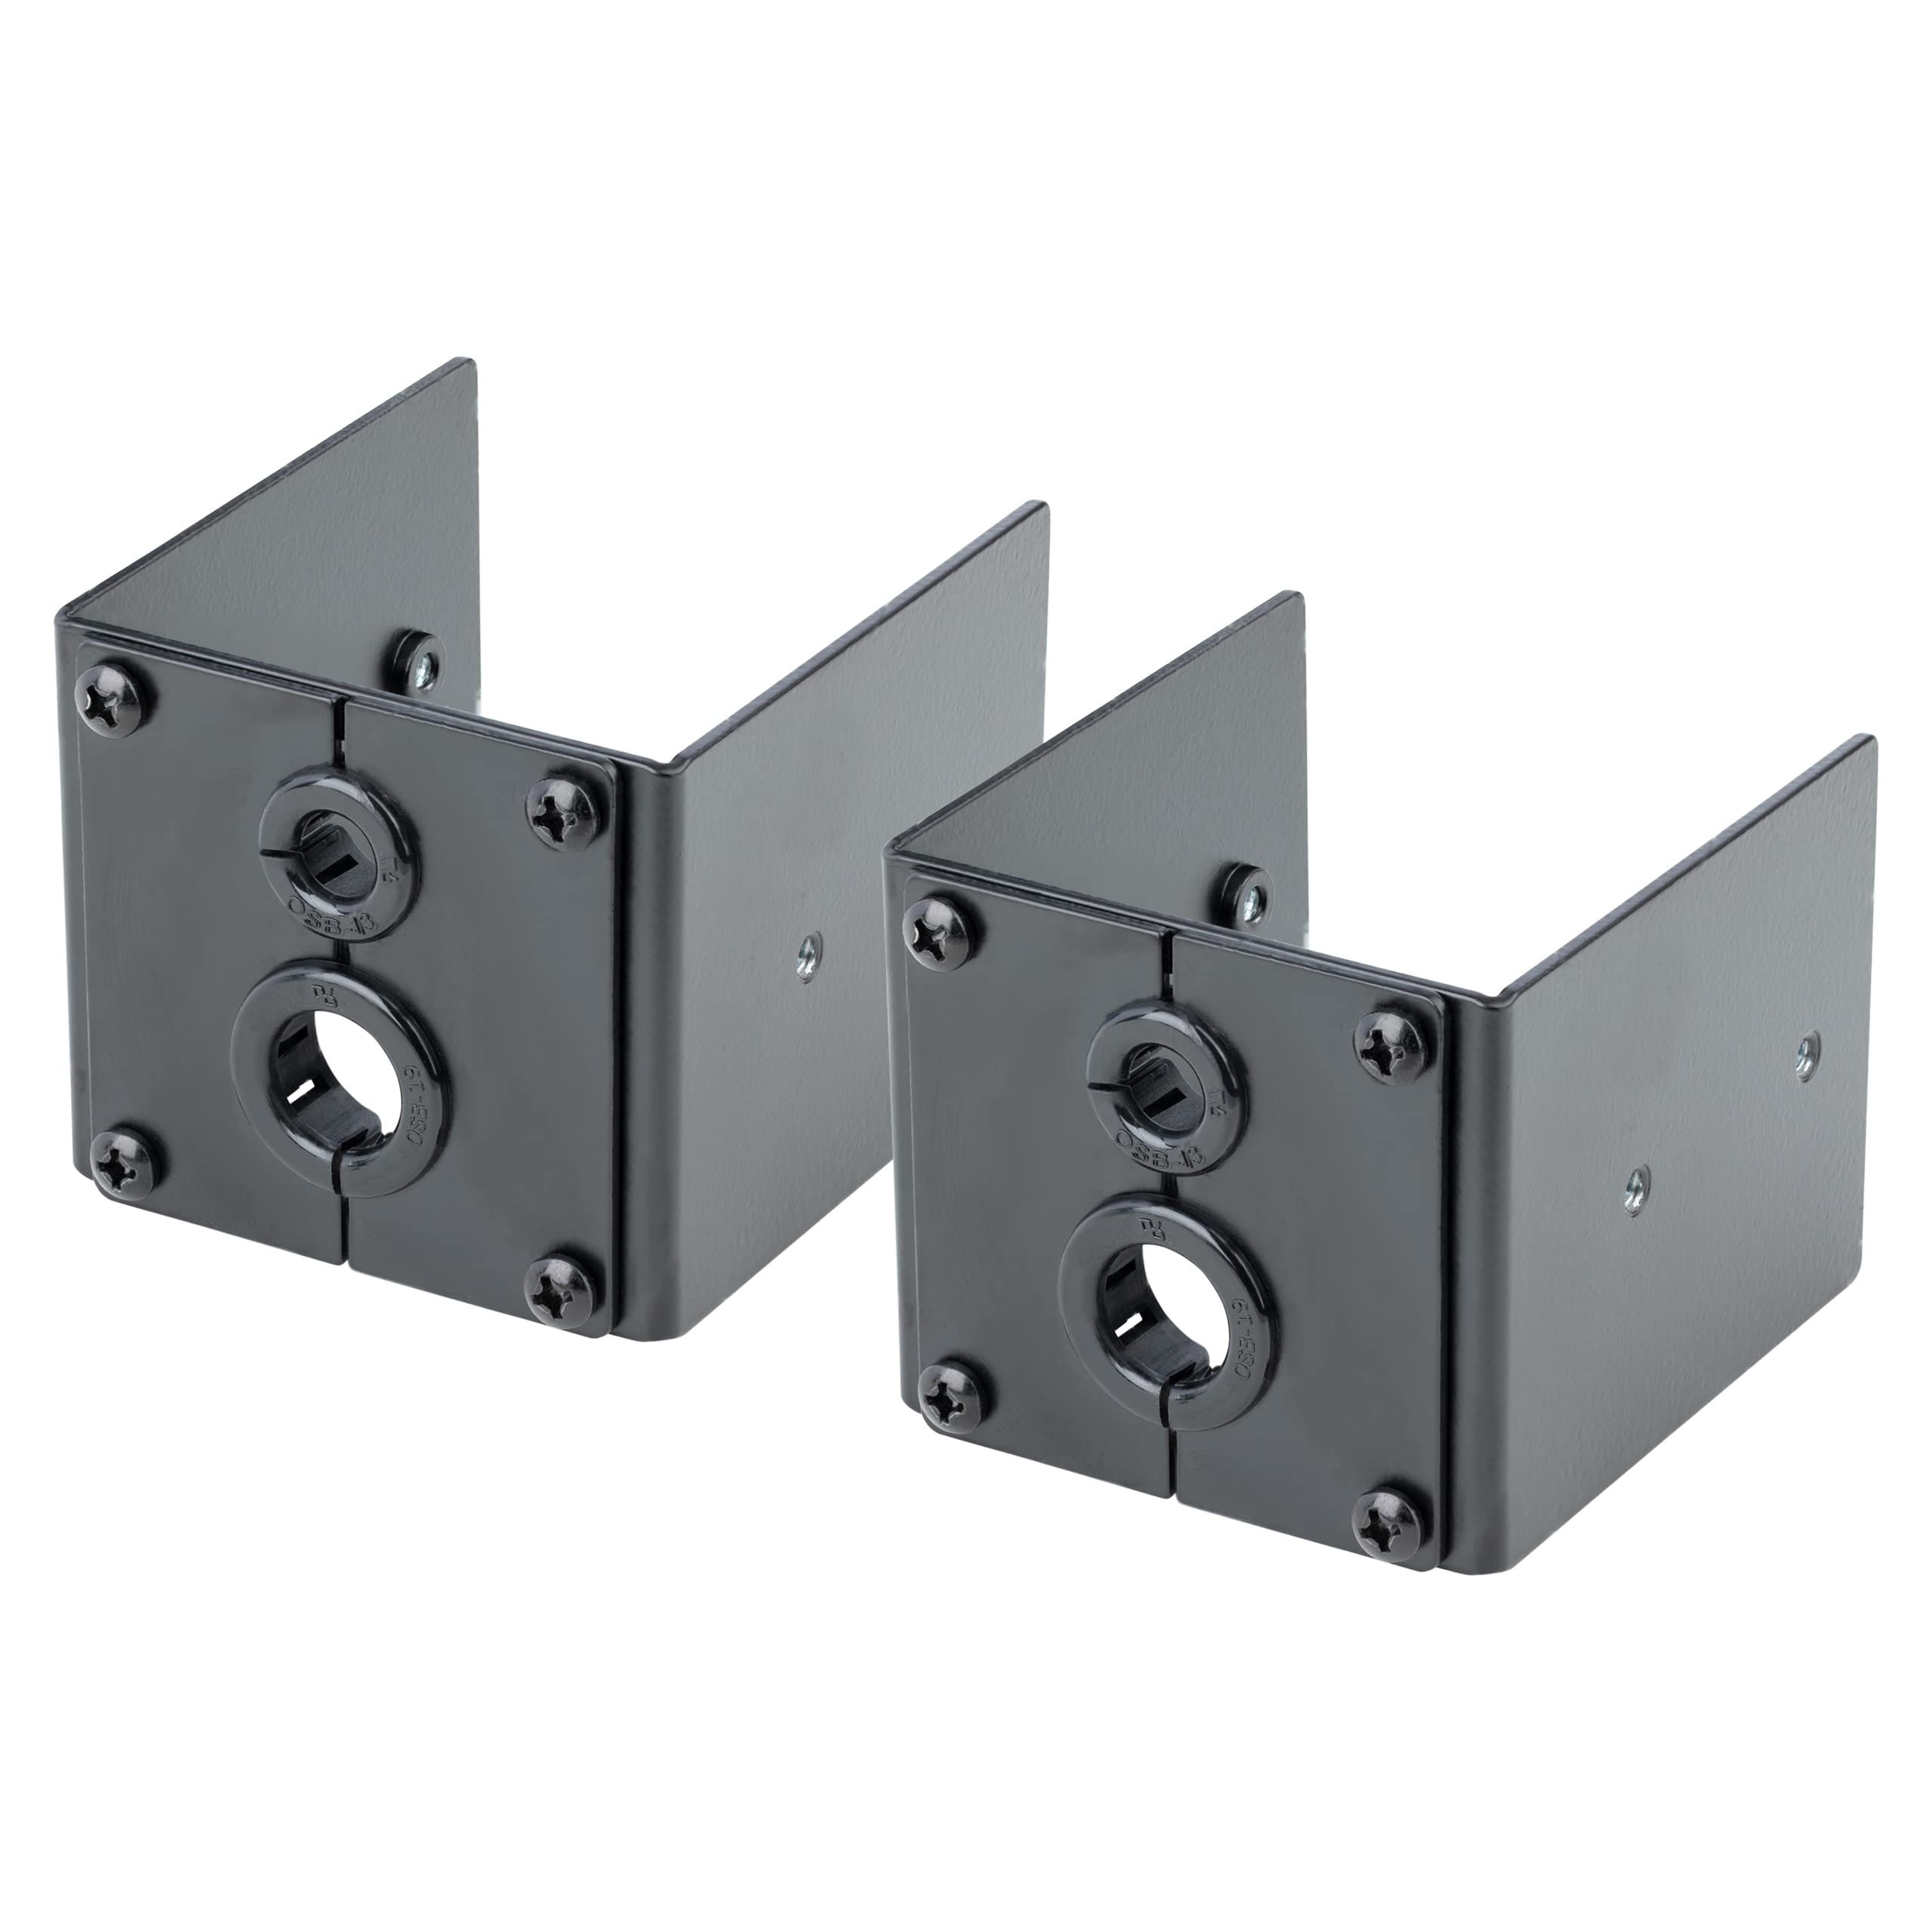 StarTech.com Cable Management Module for Conference Table Connectivity Box - Includes 4X Grommet Holes - Installs in BOX4MODULE or BEZ4MOD (MOD4CABLEH)